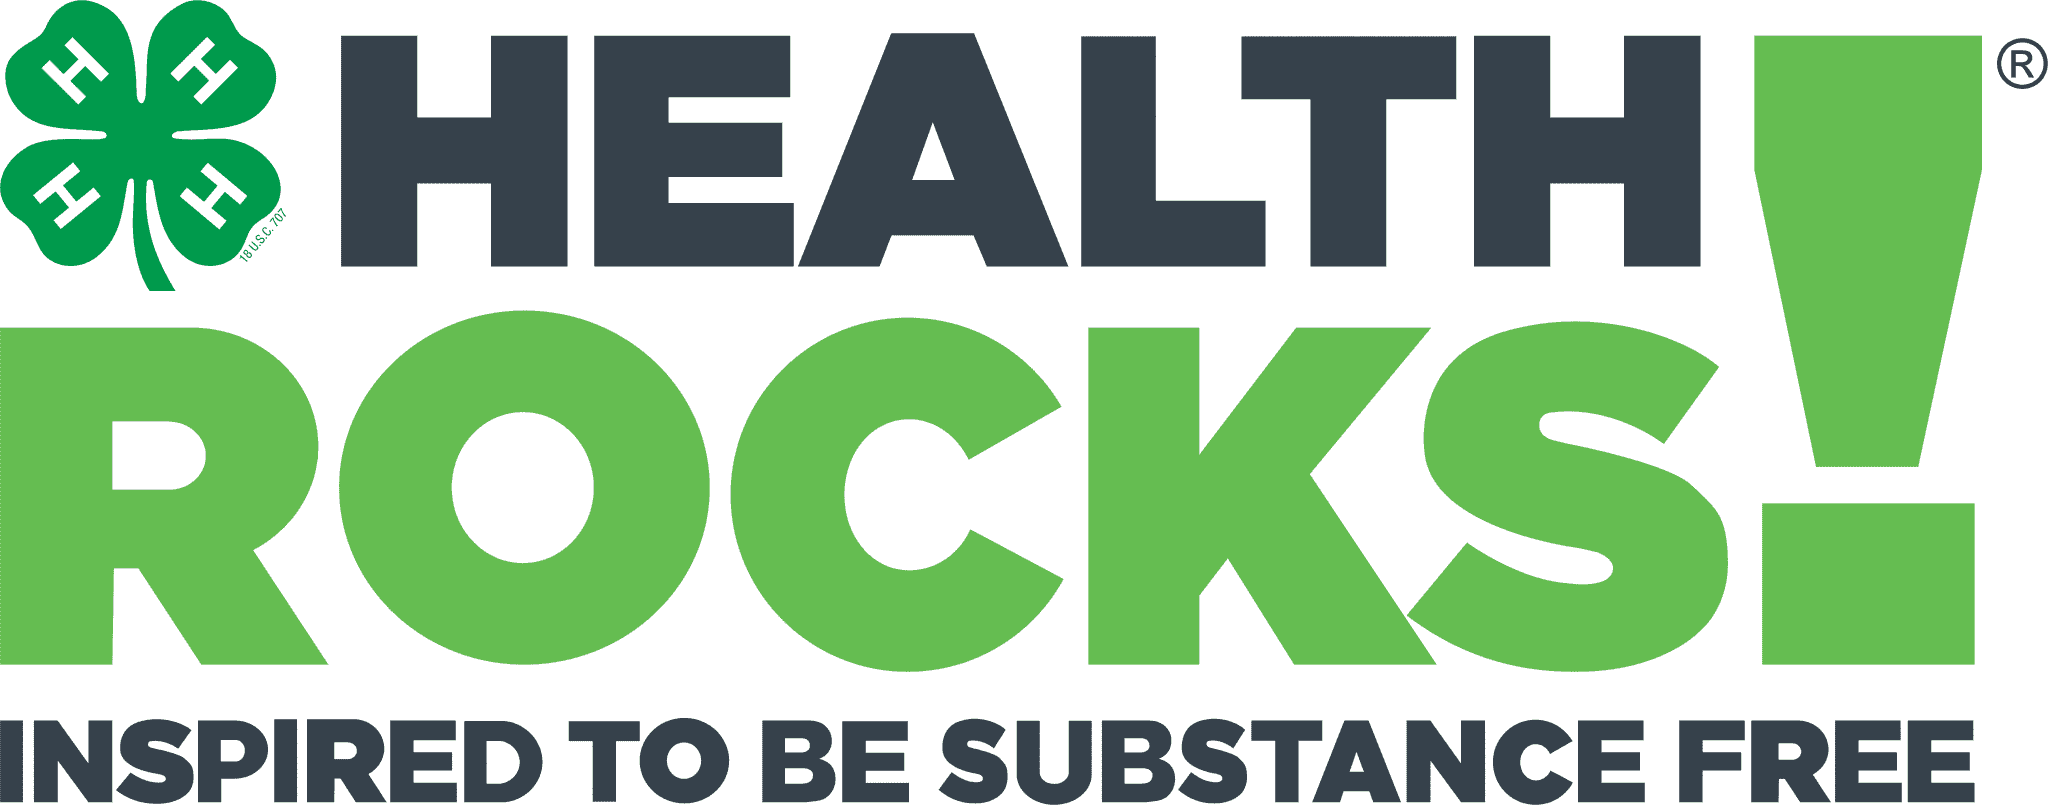 Health Rocks! Logo, inspired to be substance free